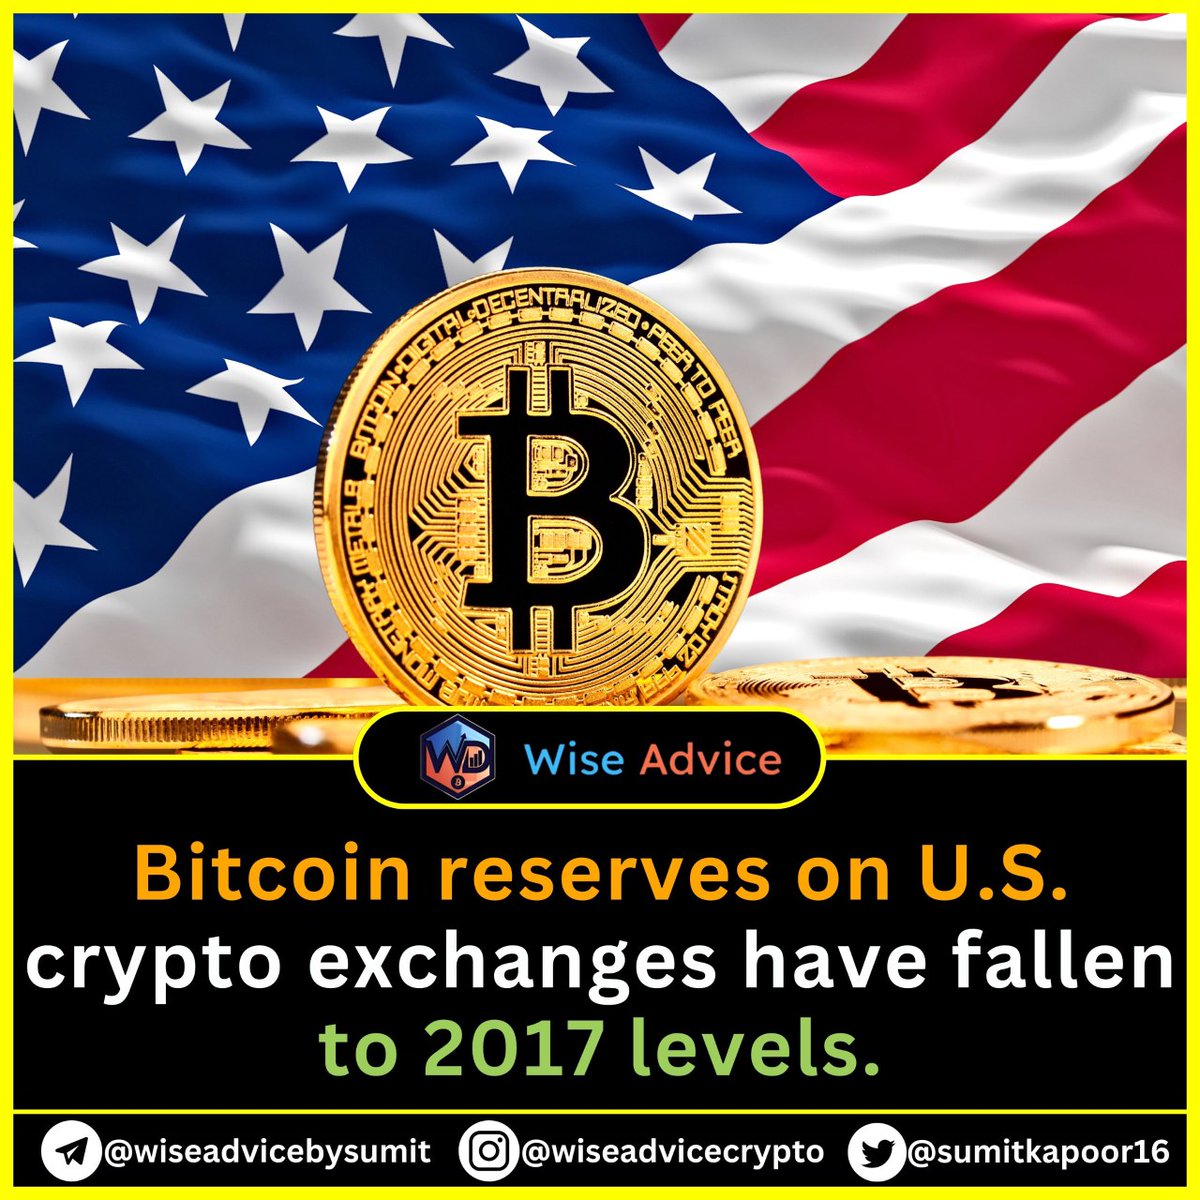 📣Bitcoin reserves on U.S. crypto exchanges have fallen to 2017 levels